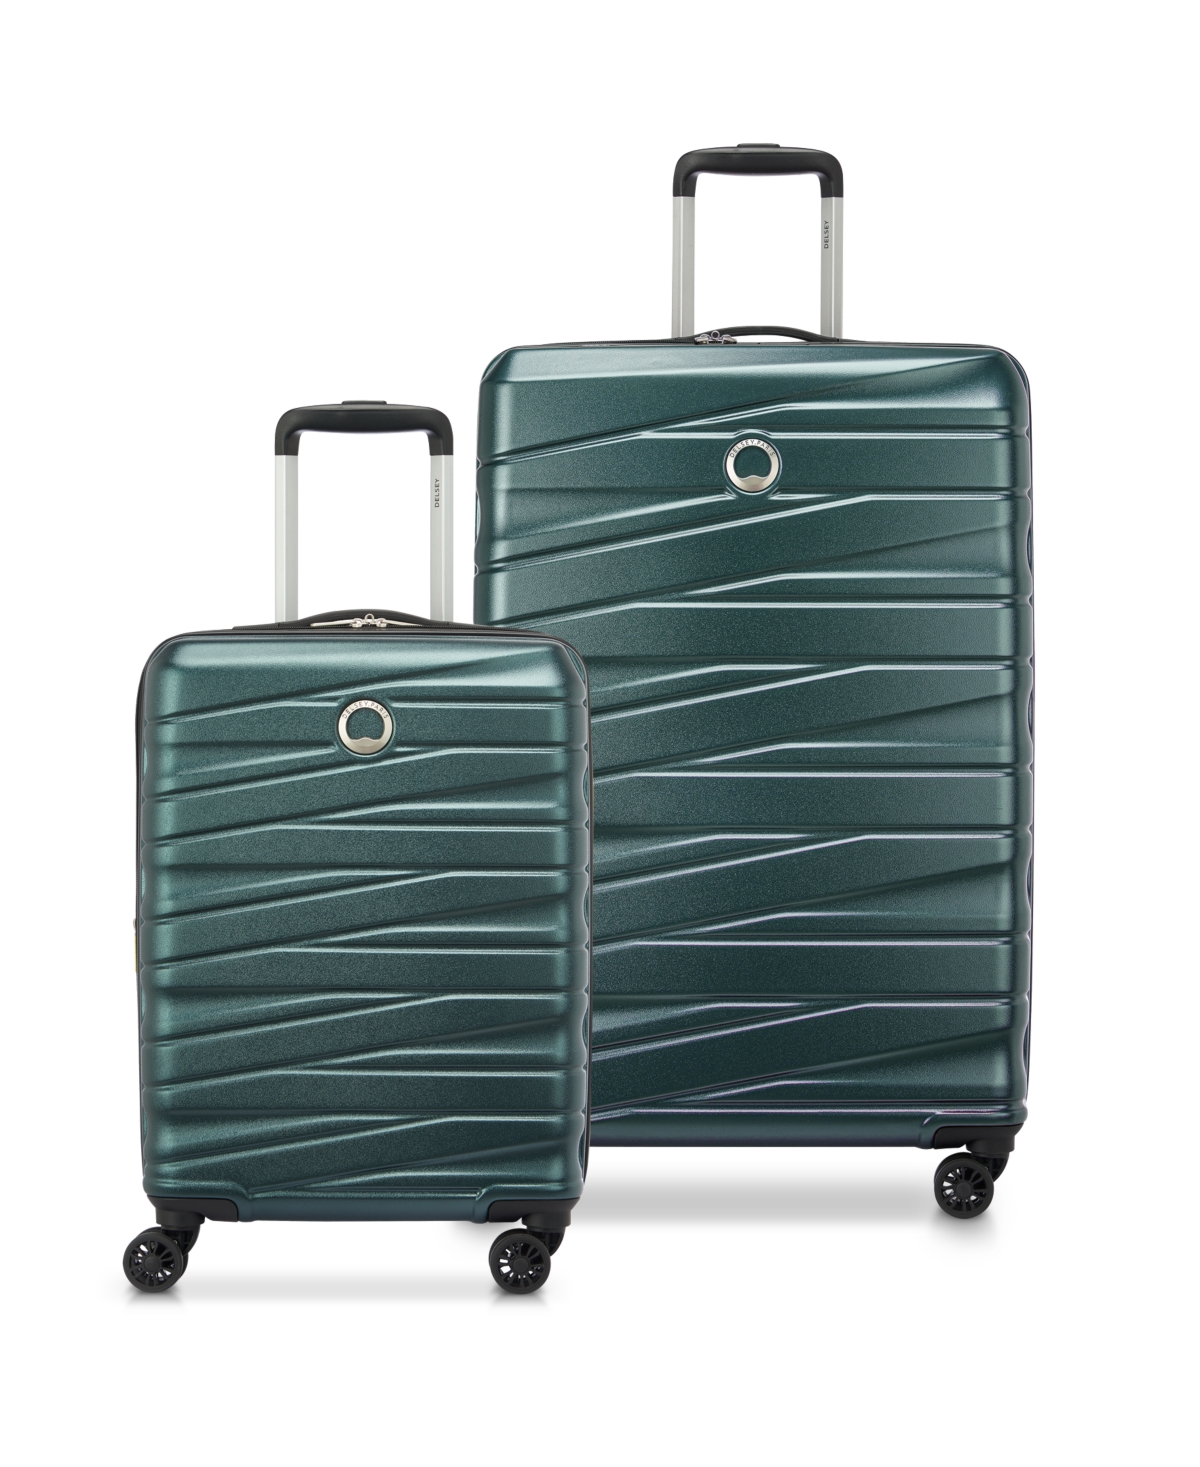 Cannes 2 Piece Hardside Luggage Set, Carry-On and 27" Spinner - Dark Teal